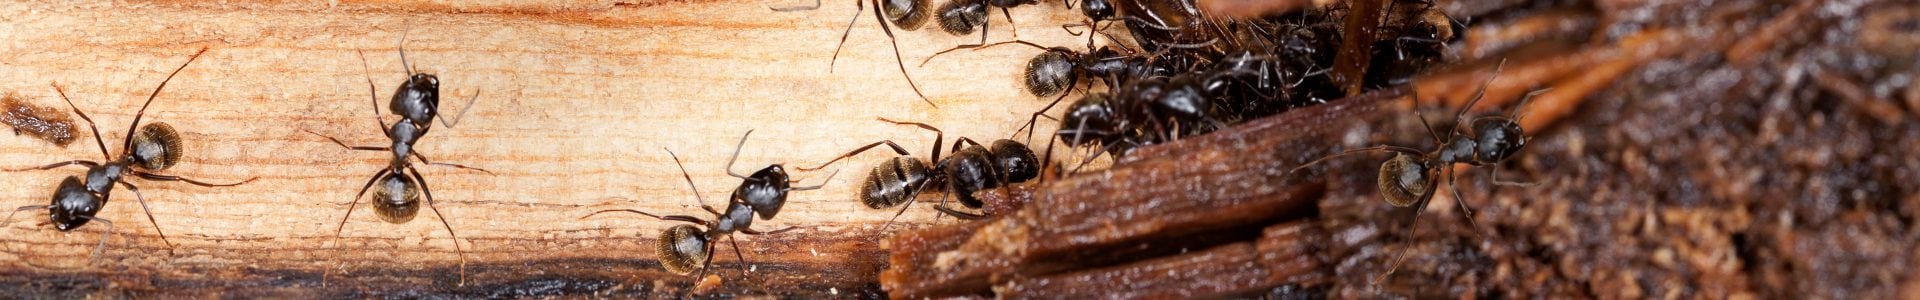 Pest Control Guide When Buying a New Home